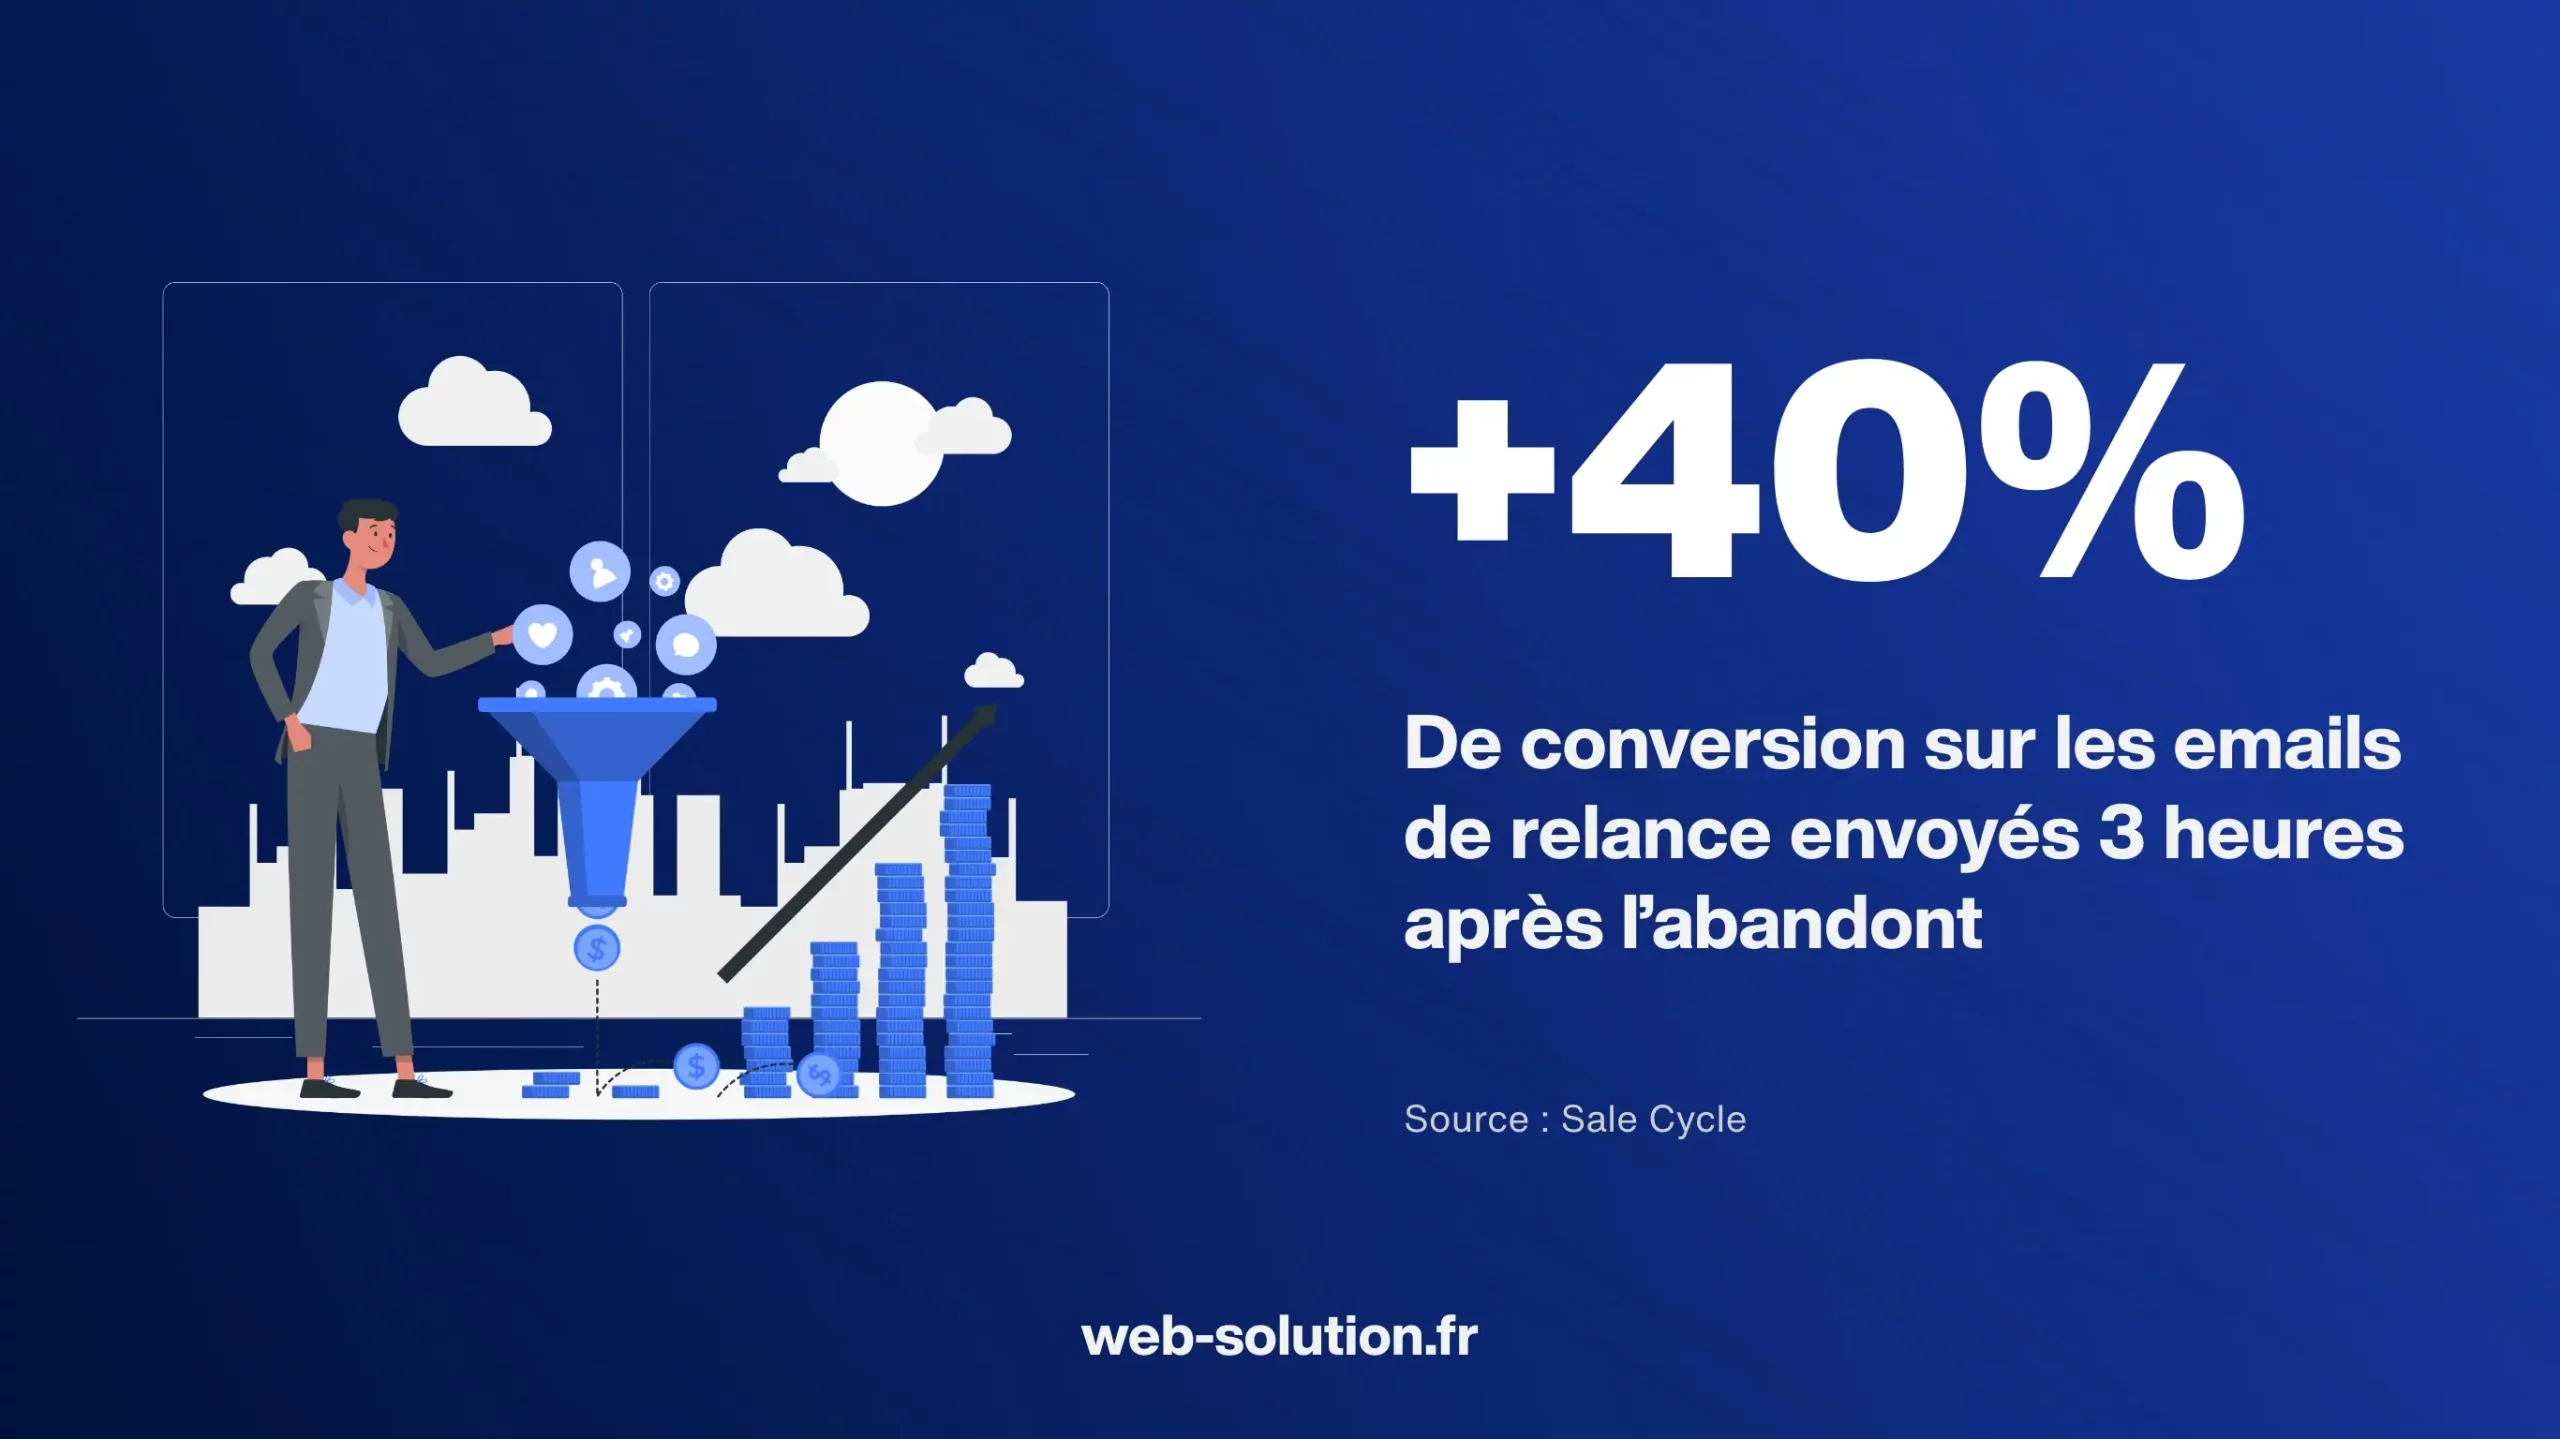 Statistiques email marketing Conversion email relance panier abandonné